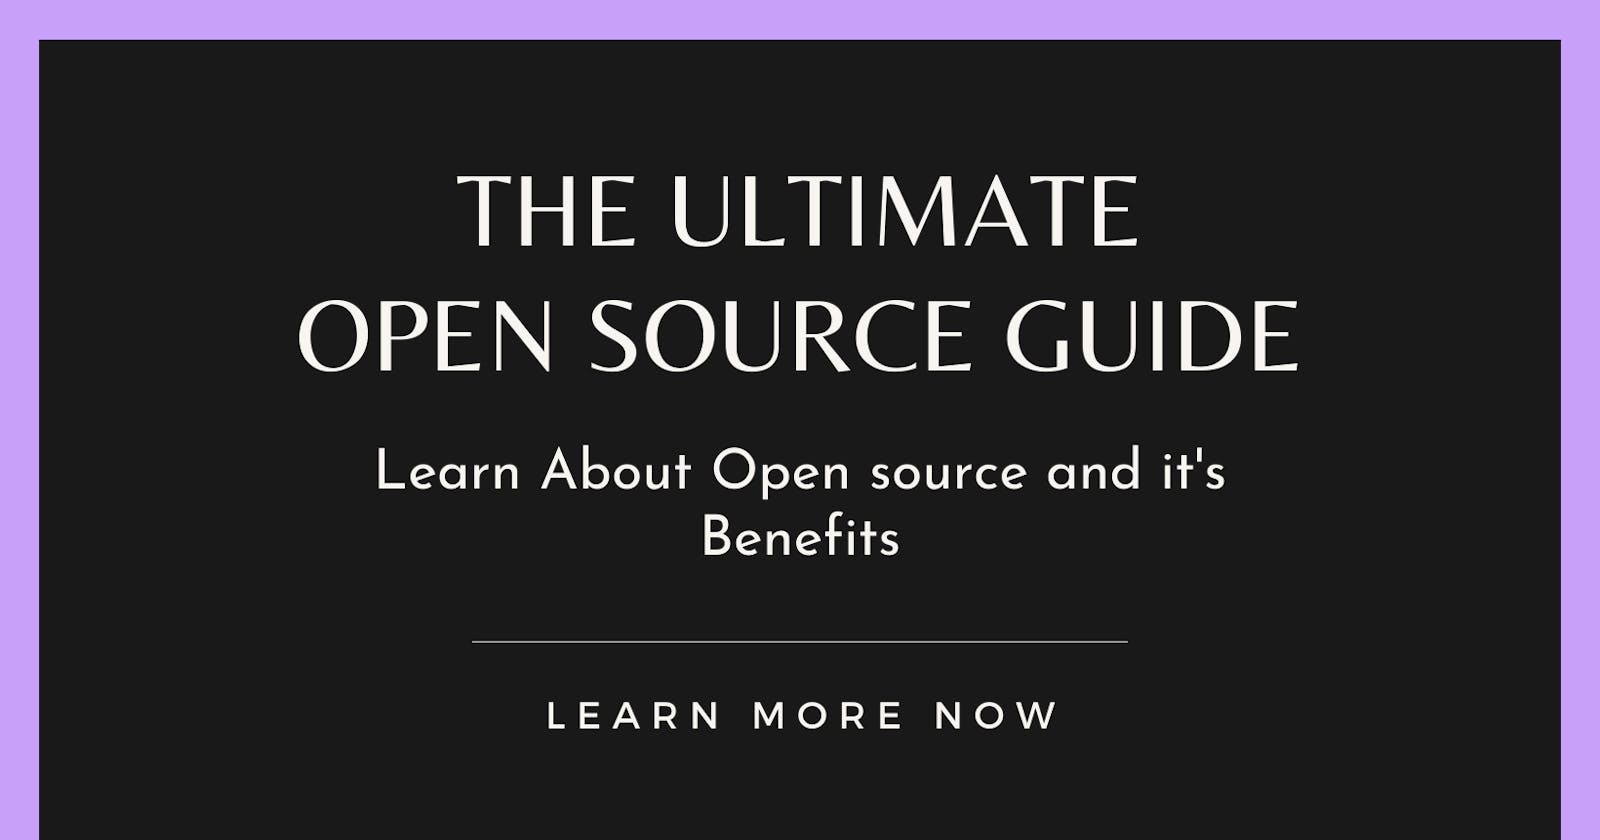 The Ultimate Open Source Guide